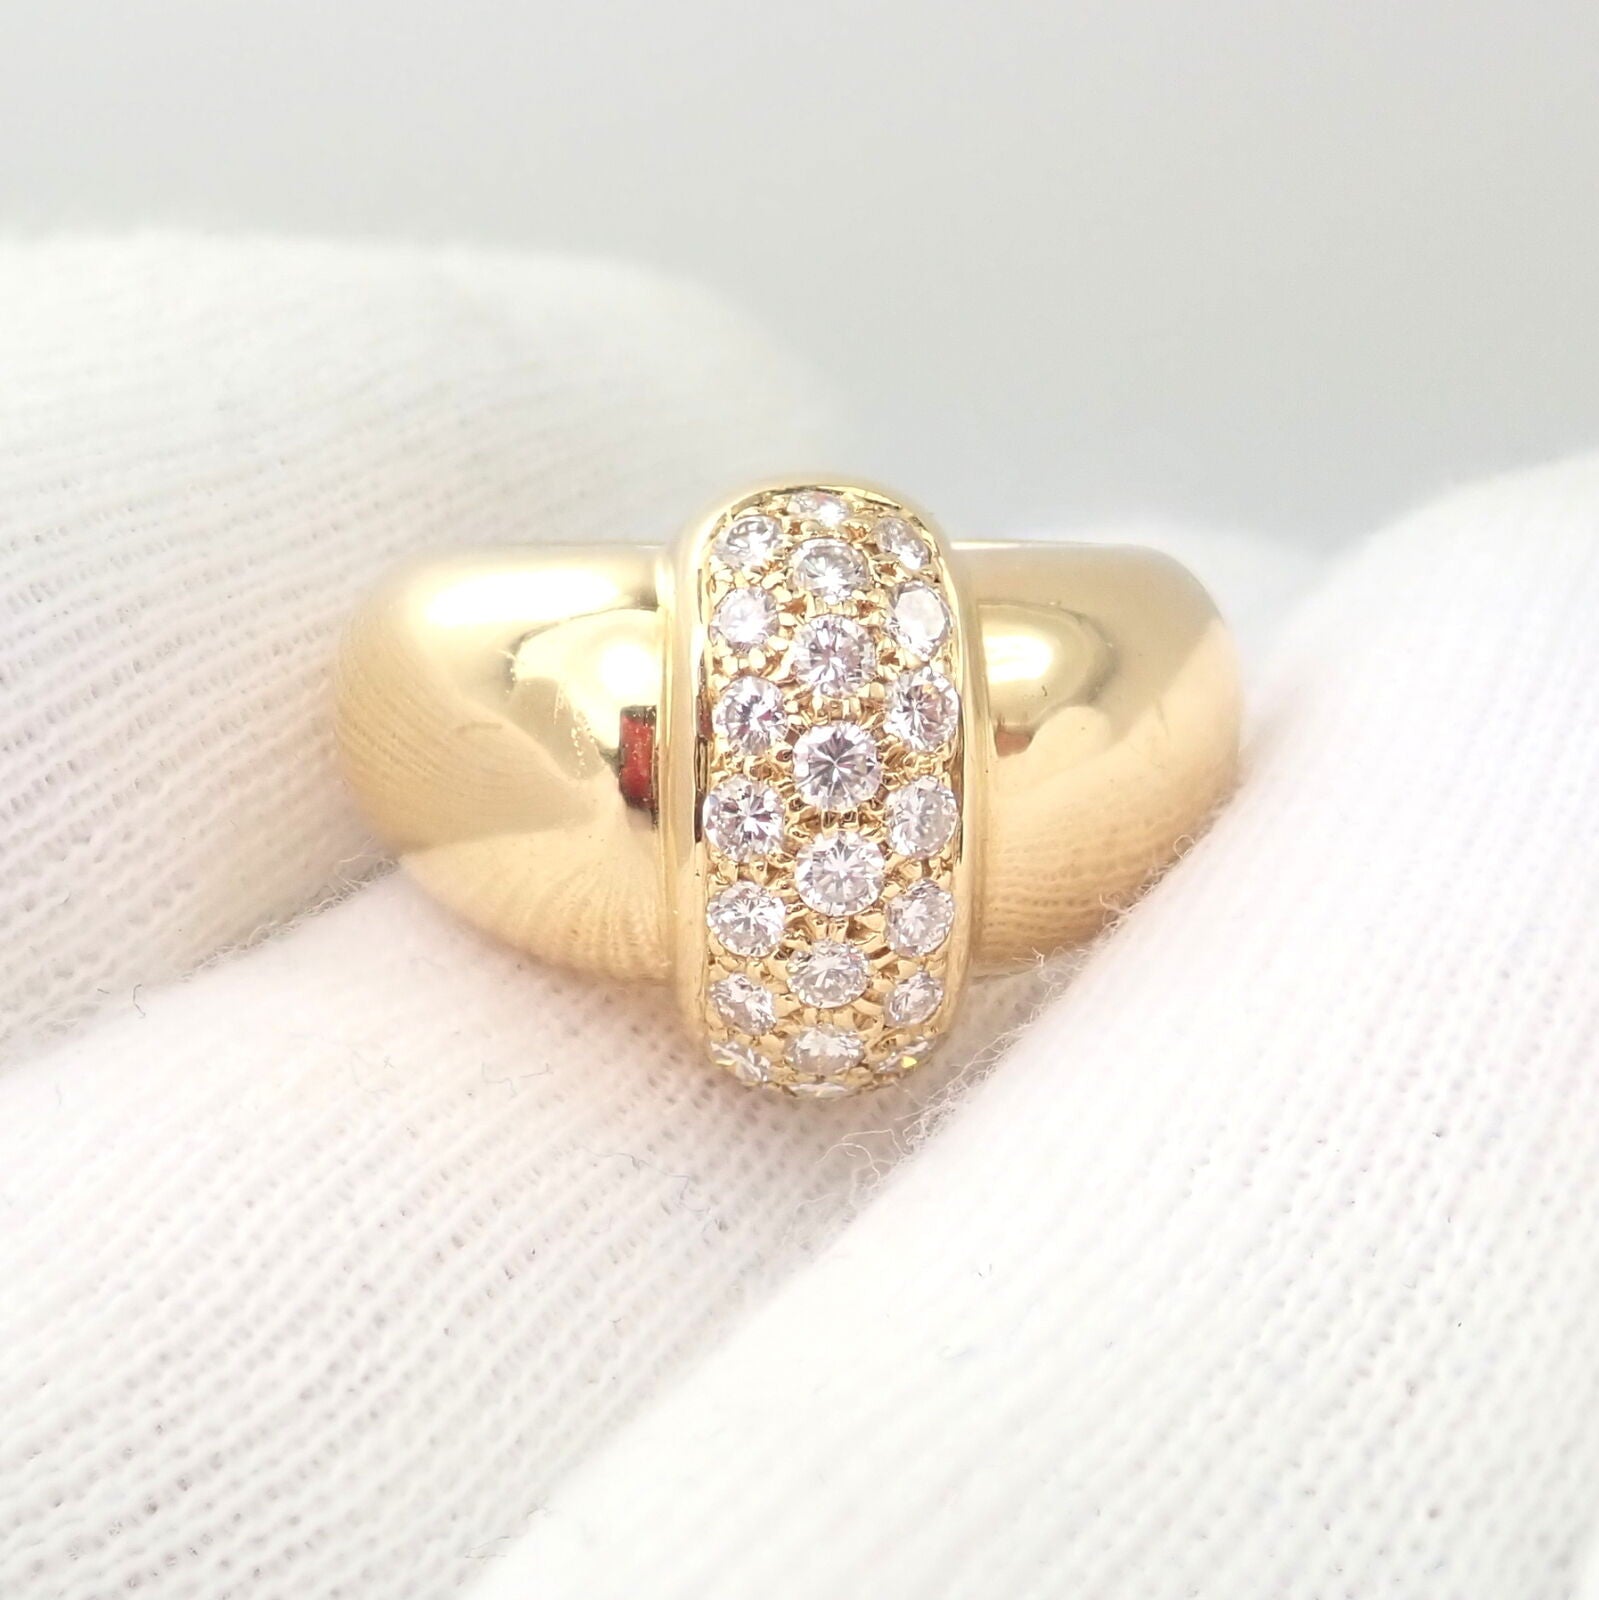 Van Cleef & Arpels Jewelry & Watches:Fine Jewelry:Rings Rare! Authentic Van Cleef & Arpels 18k Yellow Gold Diamond Cocktail Ring Sz 5.25